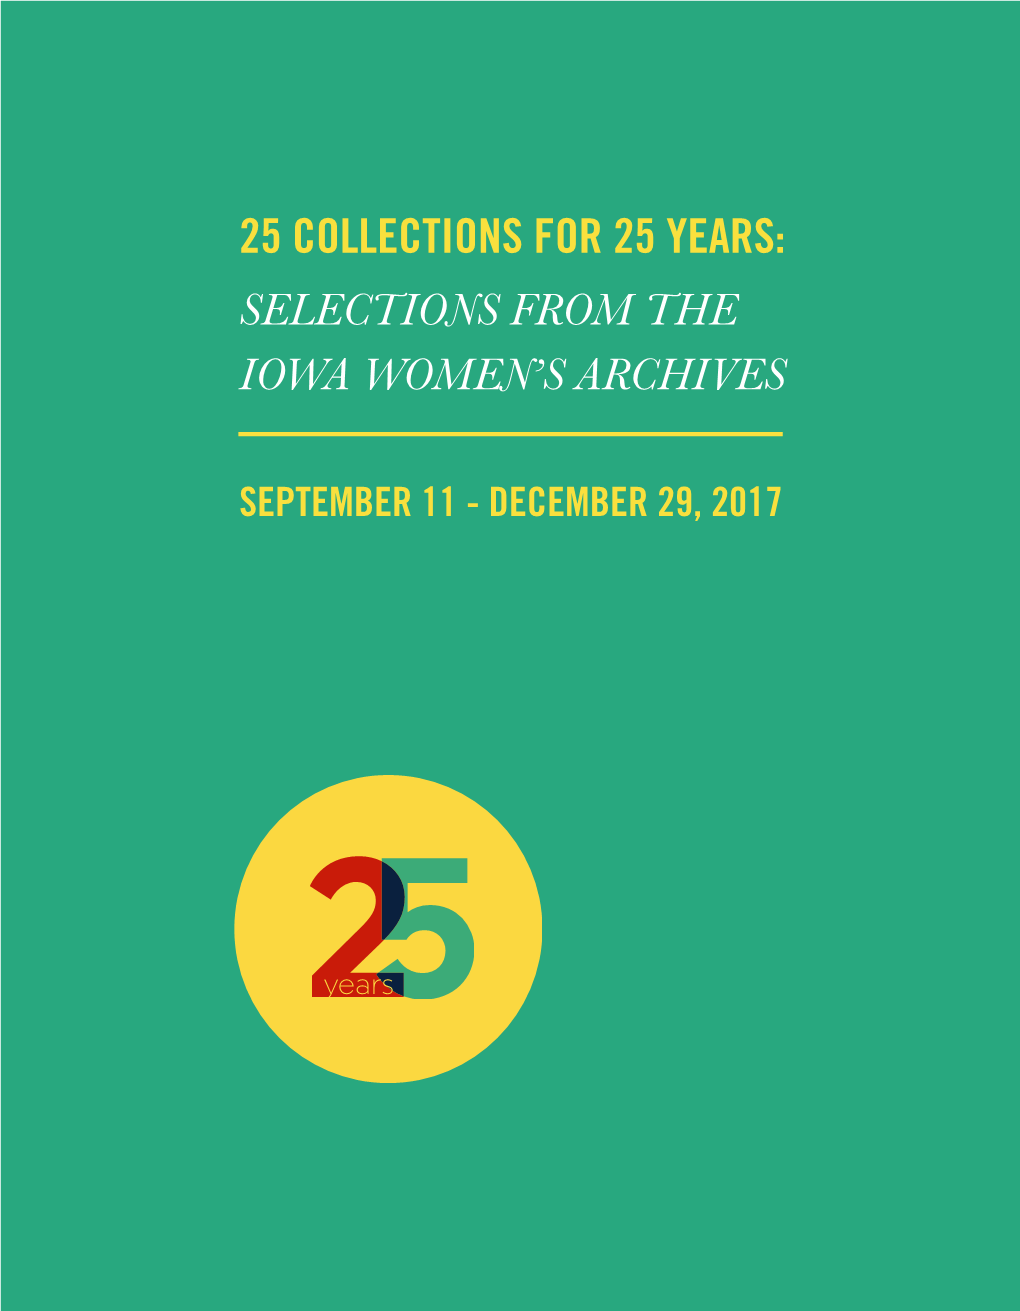 25 Collections for 25 Years: Selections from the Iowa Women's